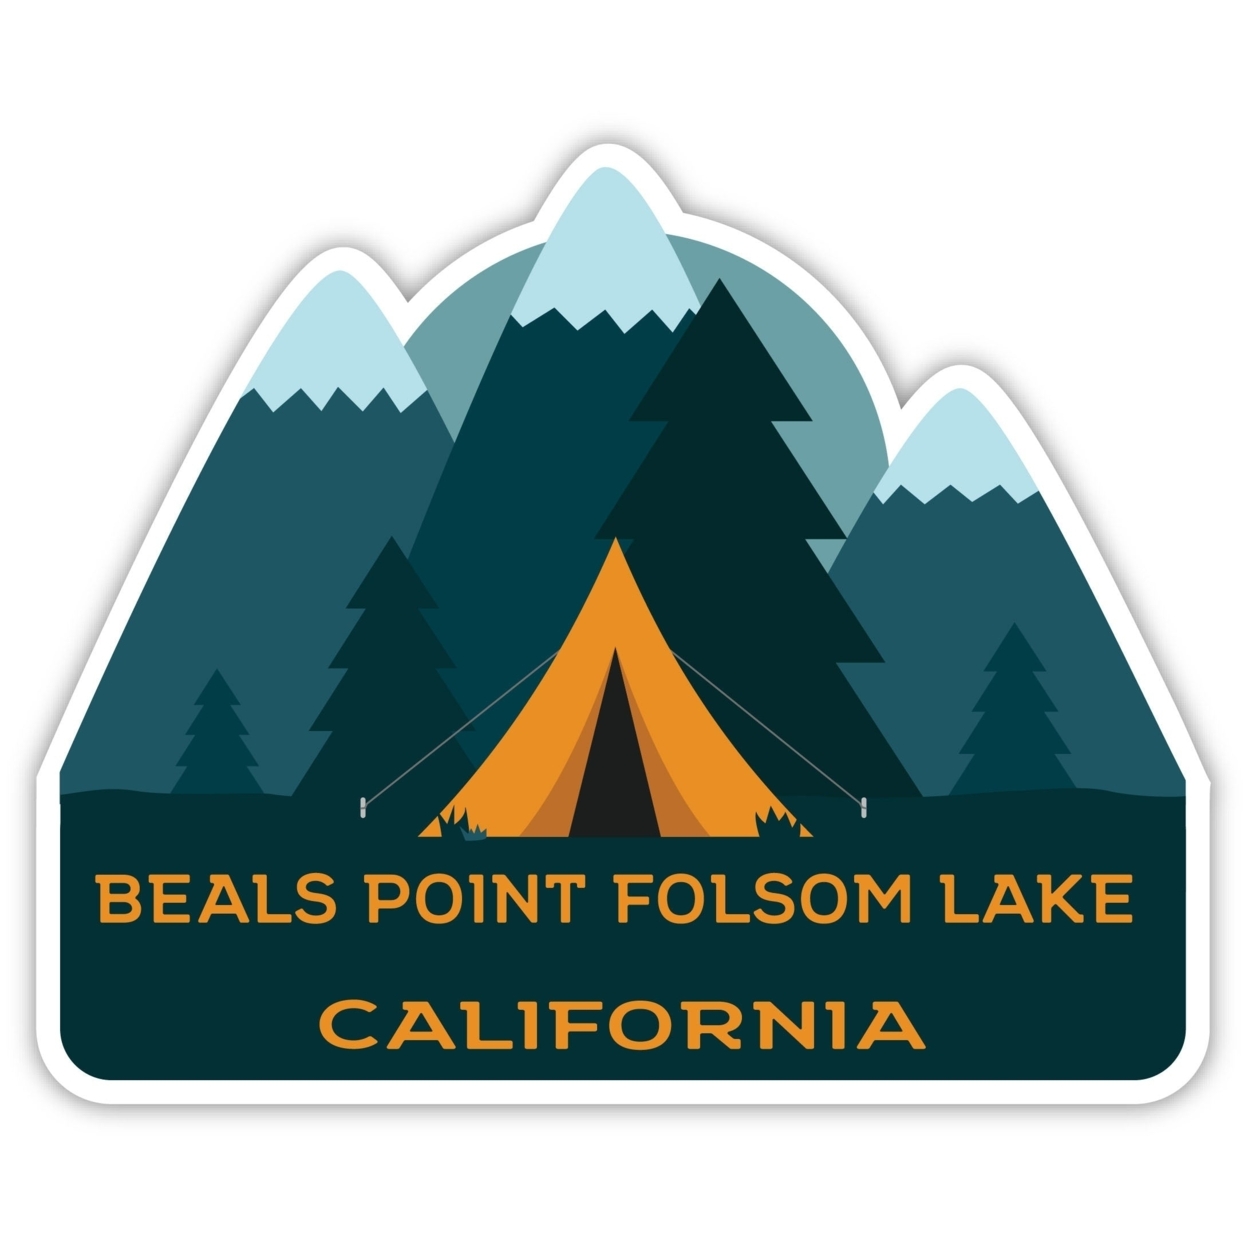 Beals Point Folsom Lake California Souvenir Decorative Stickers (Choose Theme And Size) - 4-Pack, 10-Inch, Tent